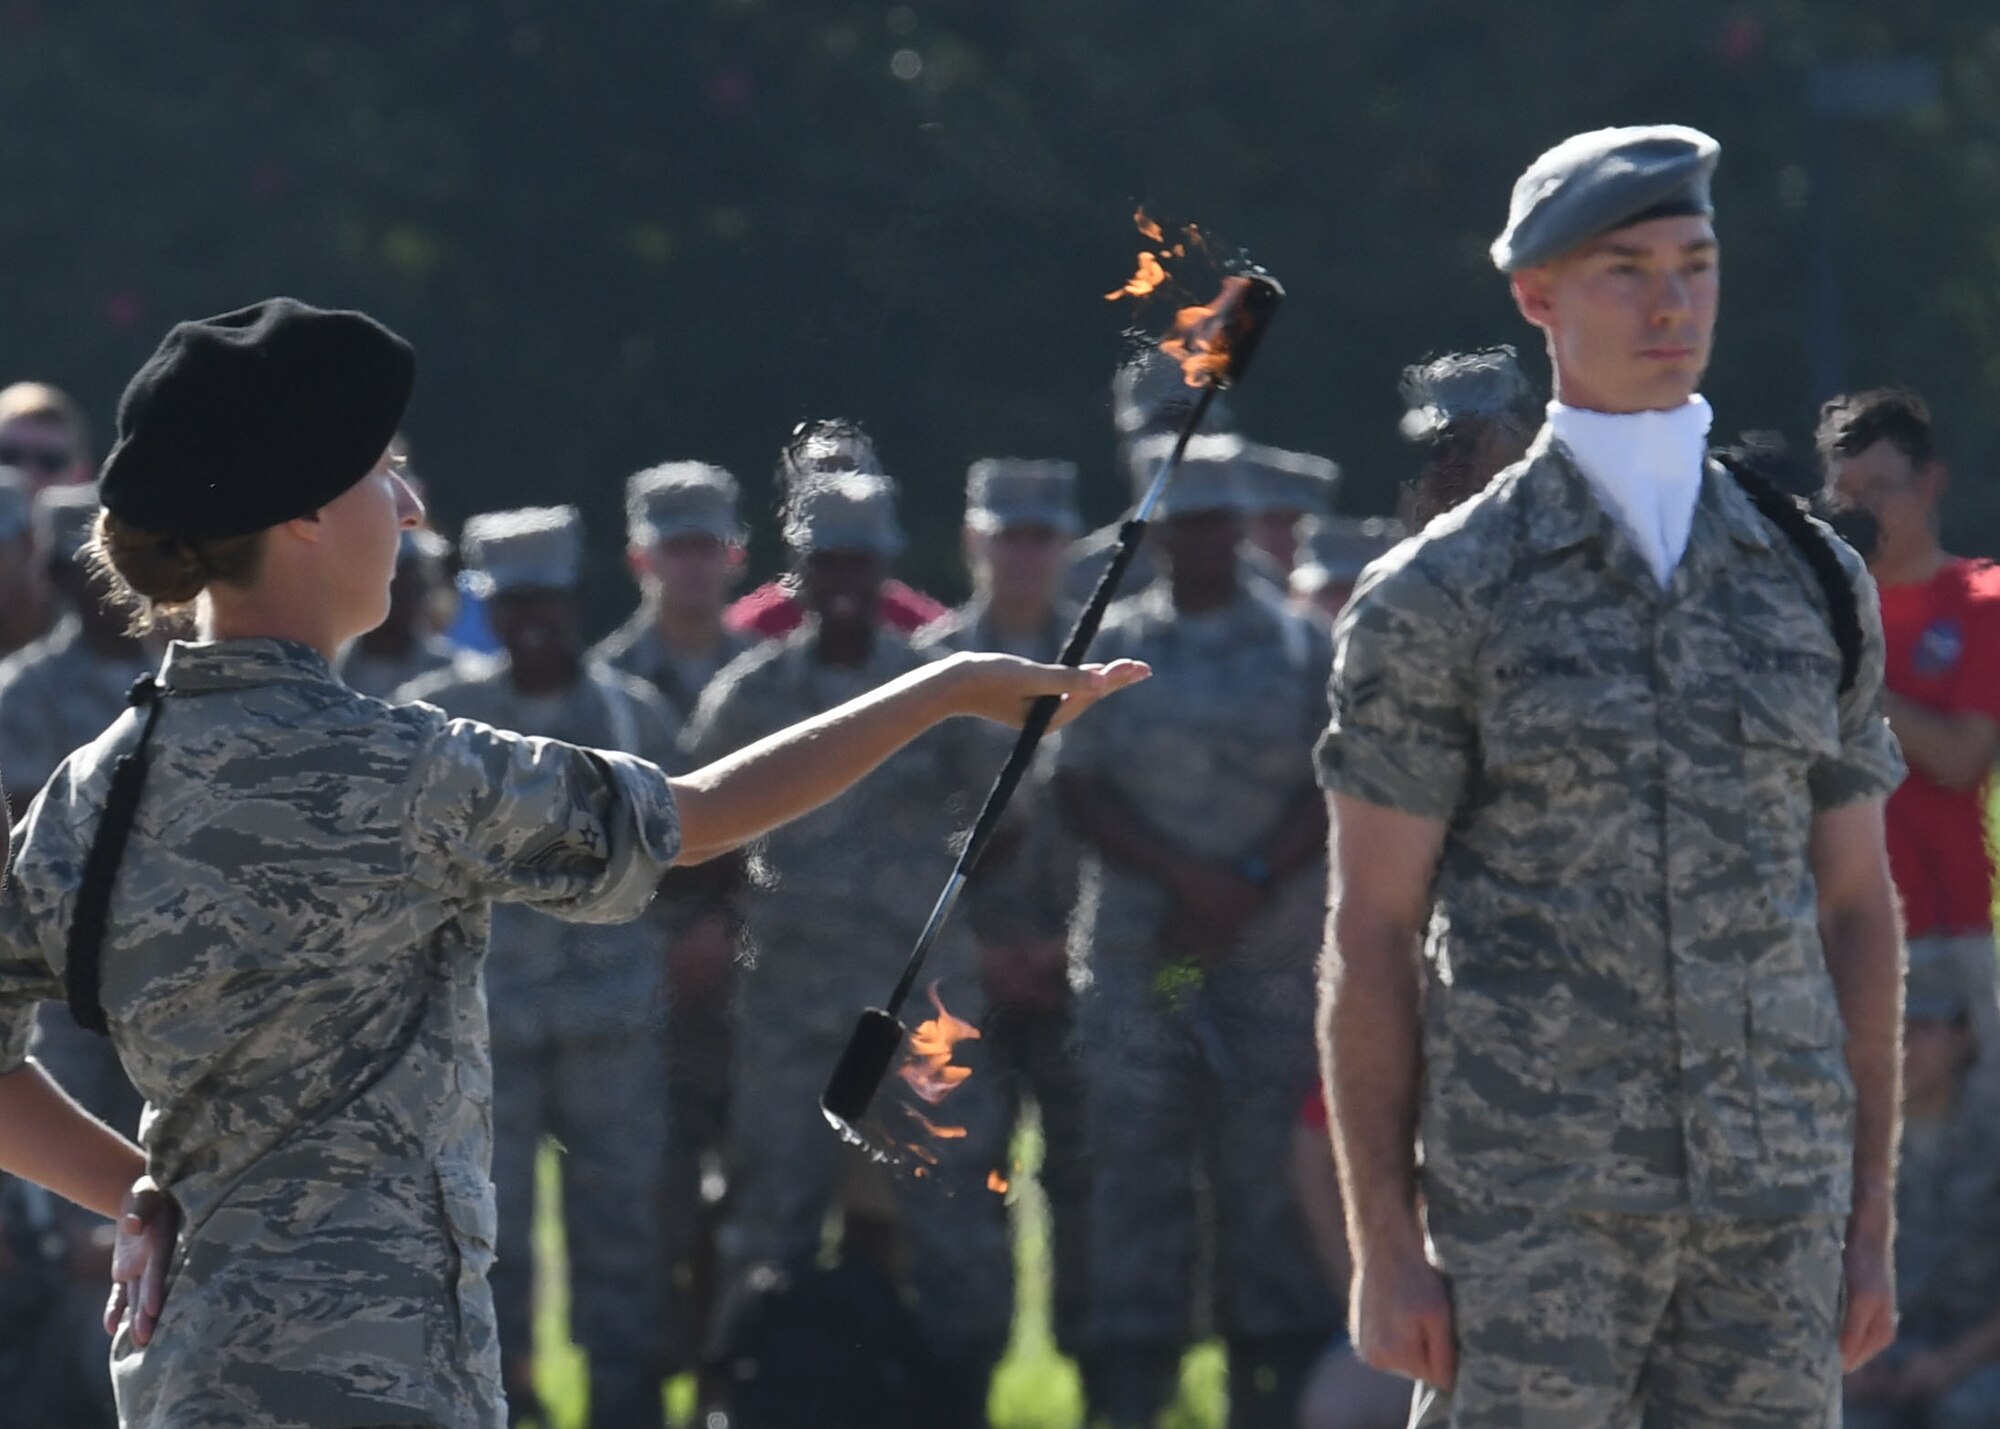 U.S. Air Force Airmen 1st Class Laura Hinson and Michael Makowski, 335th Training Squadron freestyle drill team members, perform during the 81st Training Group drill down on the Levitow Training Support Facility drill pad at Keesler Air Force Base, Mississippi, Sept. 7, 2018. Airmen from the 81st TRG competed in a quarterly open ranks inspection, regulation drill routine and freestyle drill routine. The 335th TRS "Bulls" took first place in each category this quarter. (U.S. Air Force photo by Kemberly Groue)